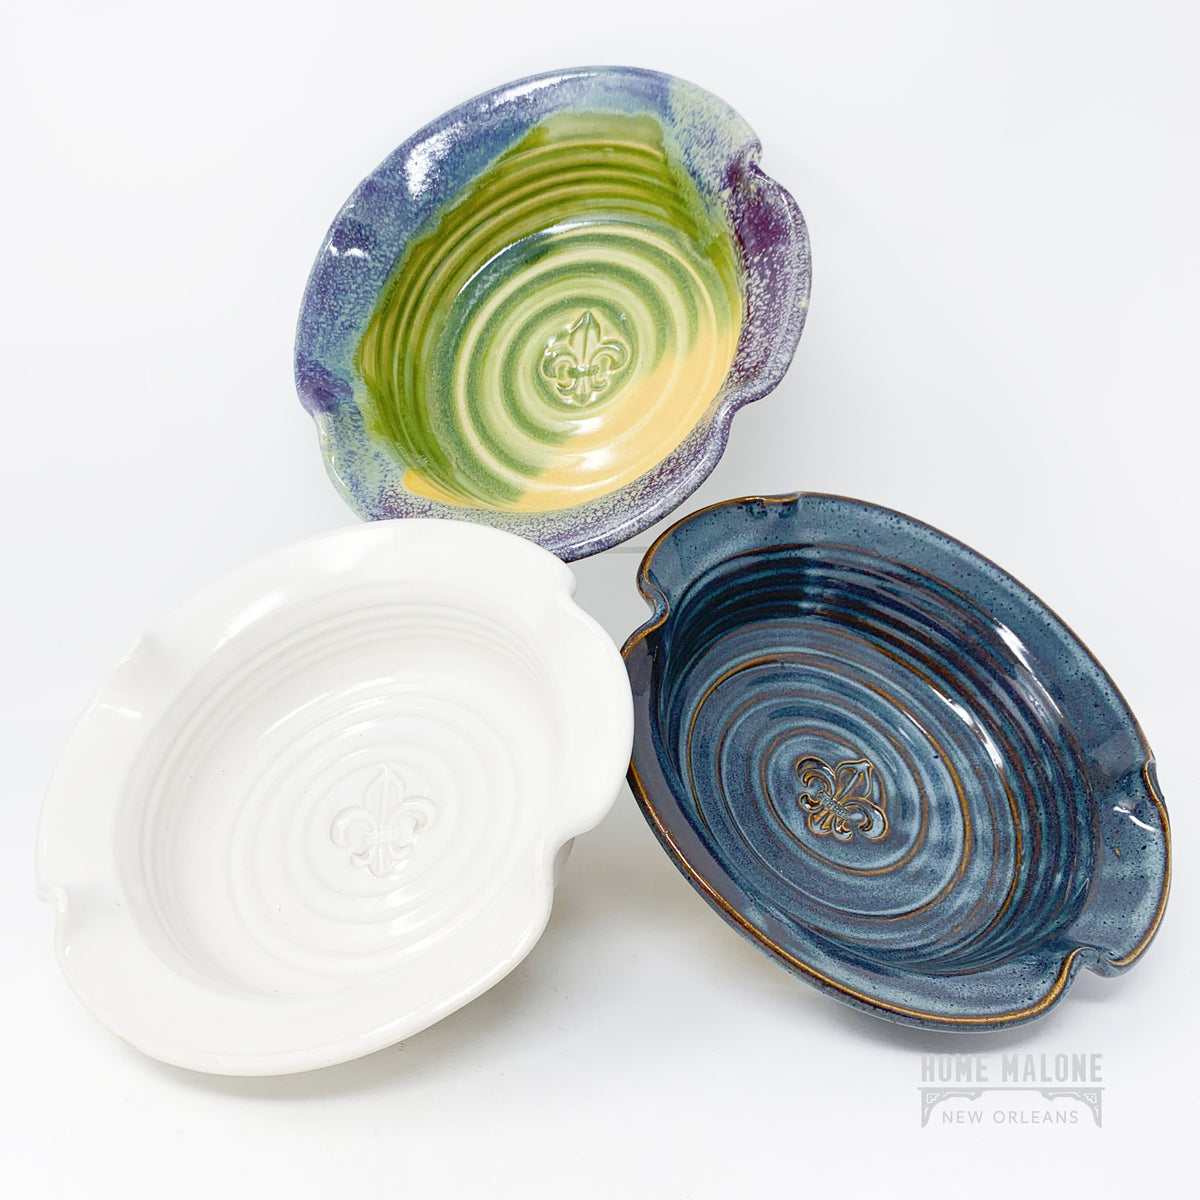 Brie Baker in Light Ocean Breeze – Small House Pottery